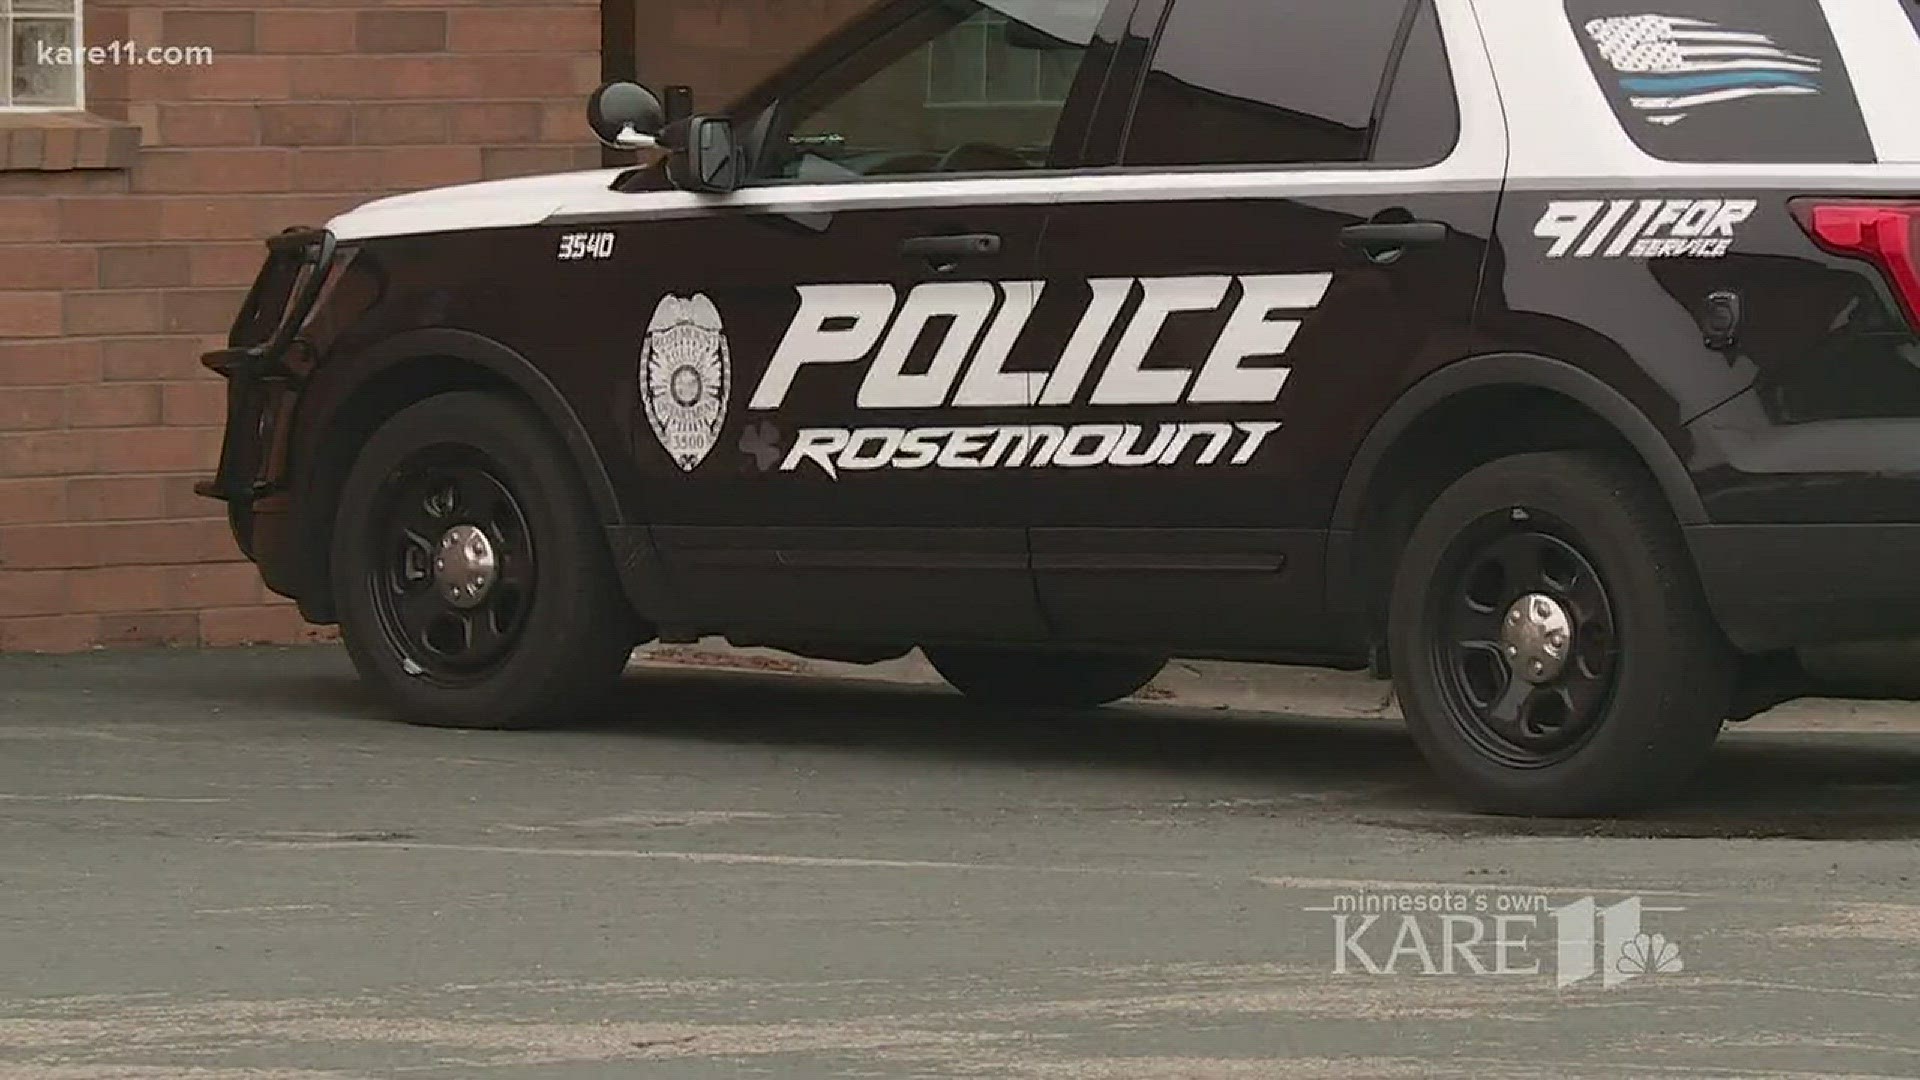 A KARE 11 investigation exposed how law enforcement agencies across Minnesota were ripped off on squad car purchases. More than $800,000 in taxpayer money is being refunded. http://kare11.tv/2EZDykA